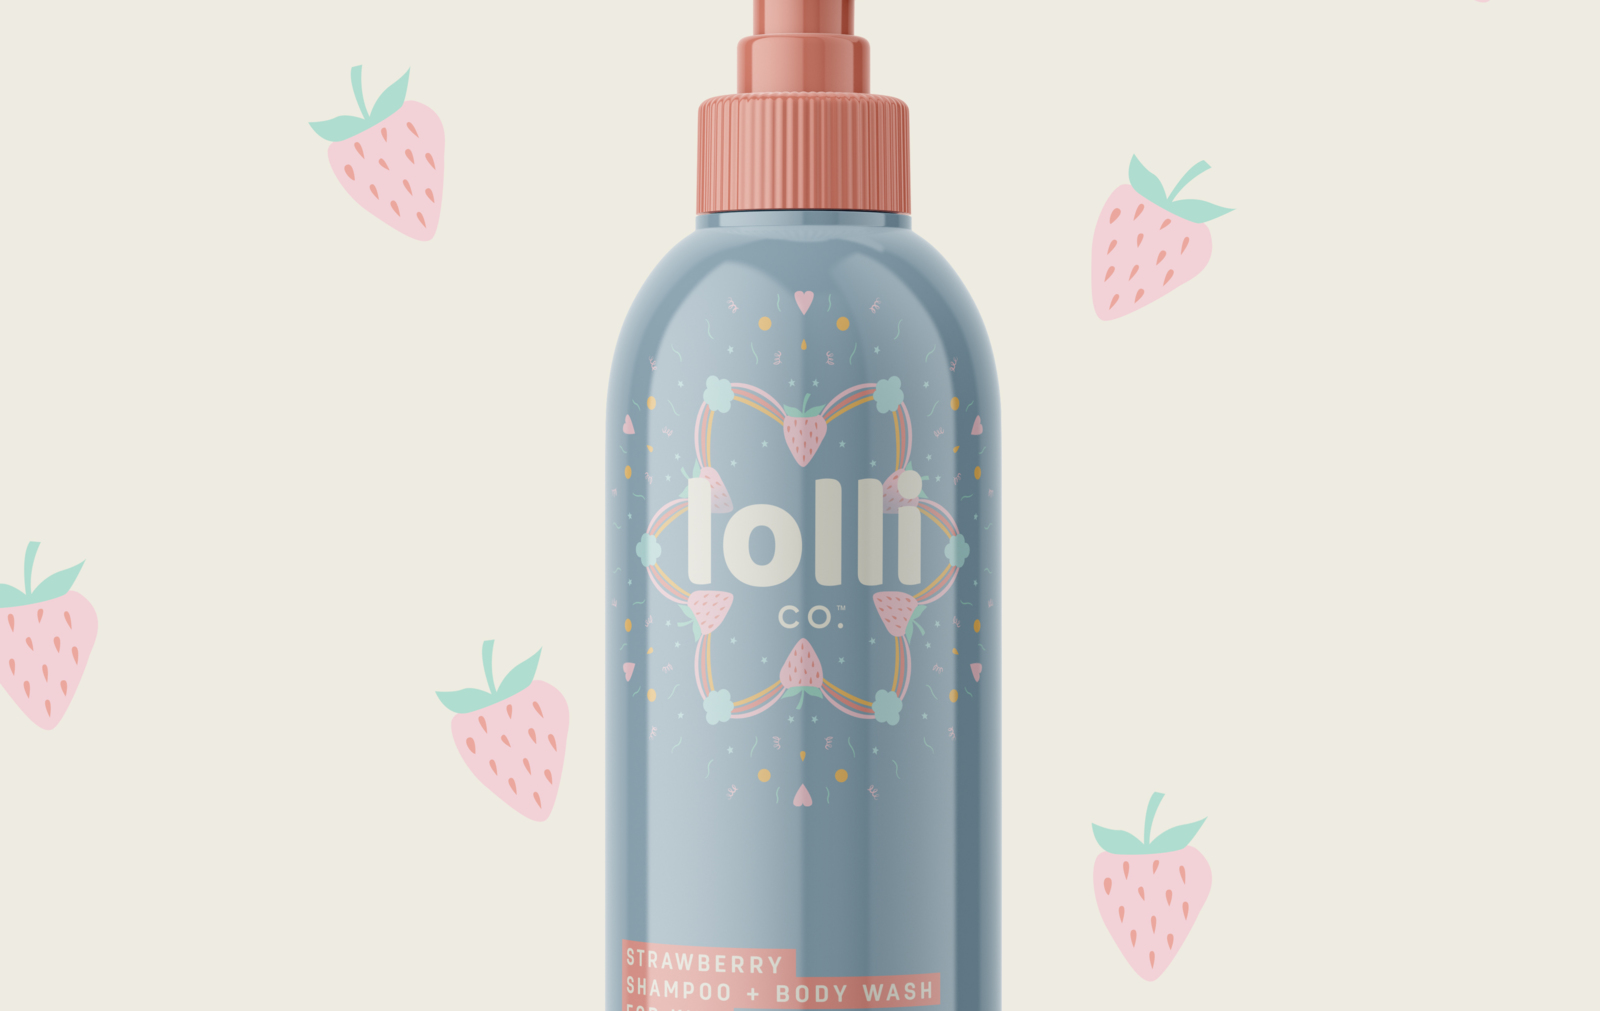 Logo Design Lolli Co strawberry shampoo and body wash on display with strawberry graphics